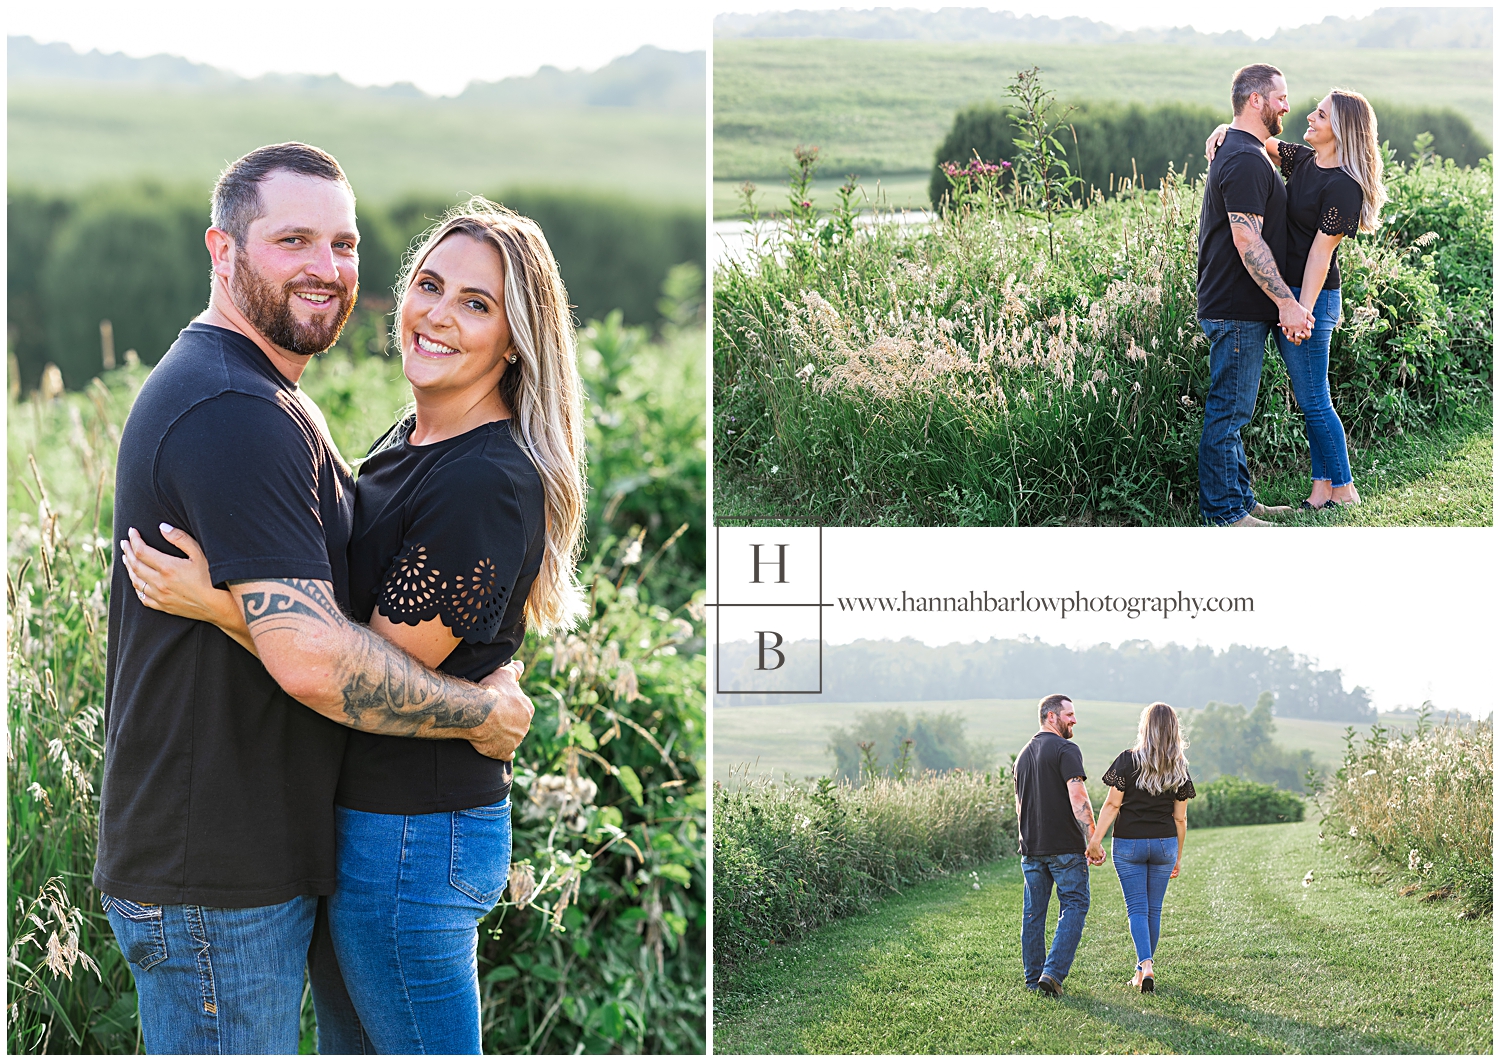 Couple embraces and walks in field with hazy backlight for engagement photos.